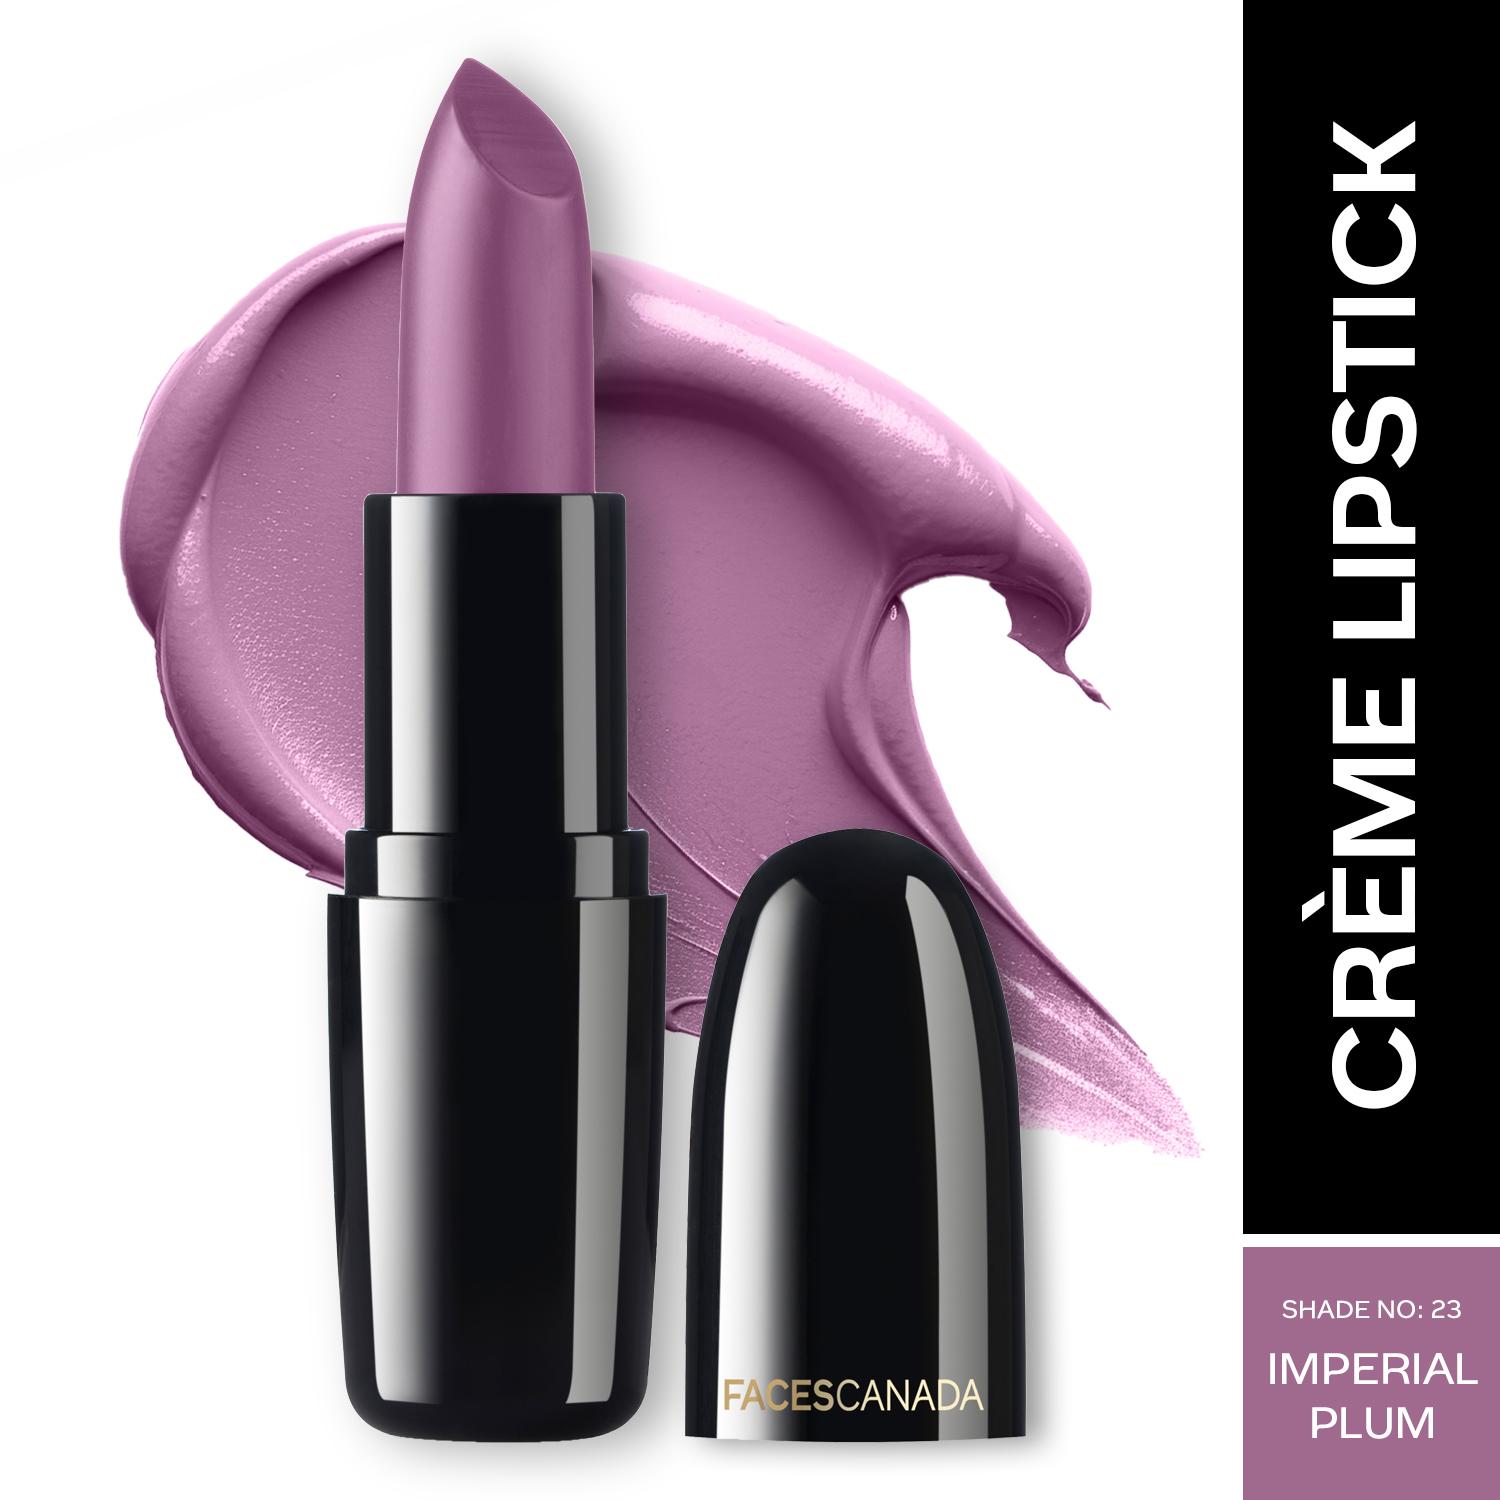 Faces Canada Weightless Creme Finish Lipstick, Creamy Finish, Hydrated Lips - Imperial Plum 23 (4 g)